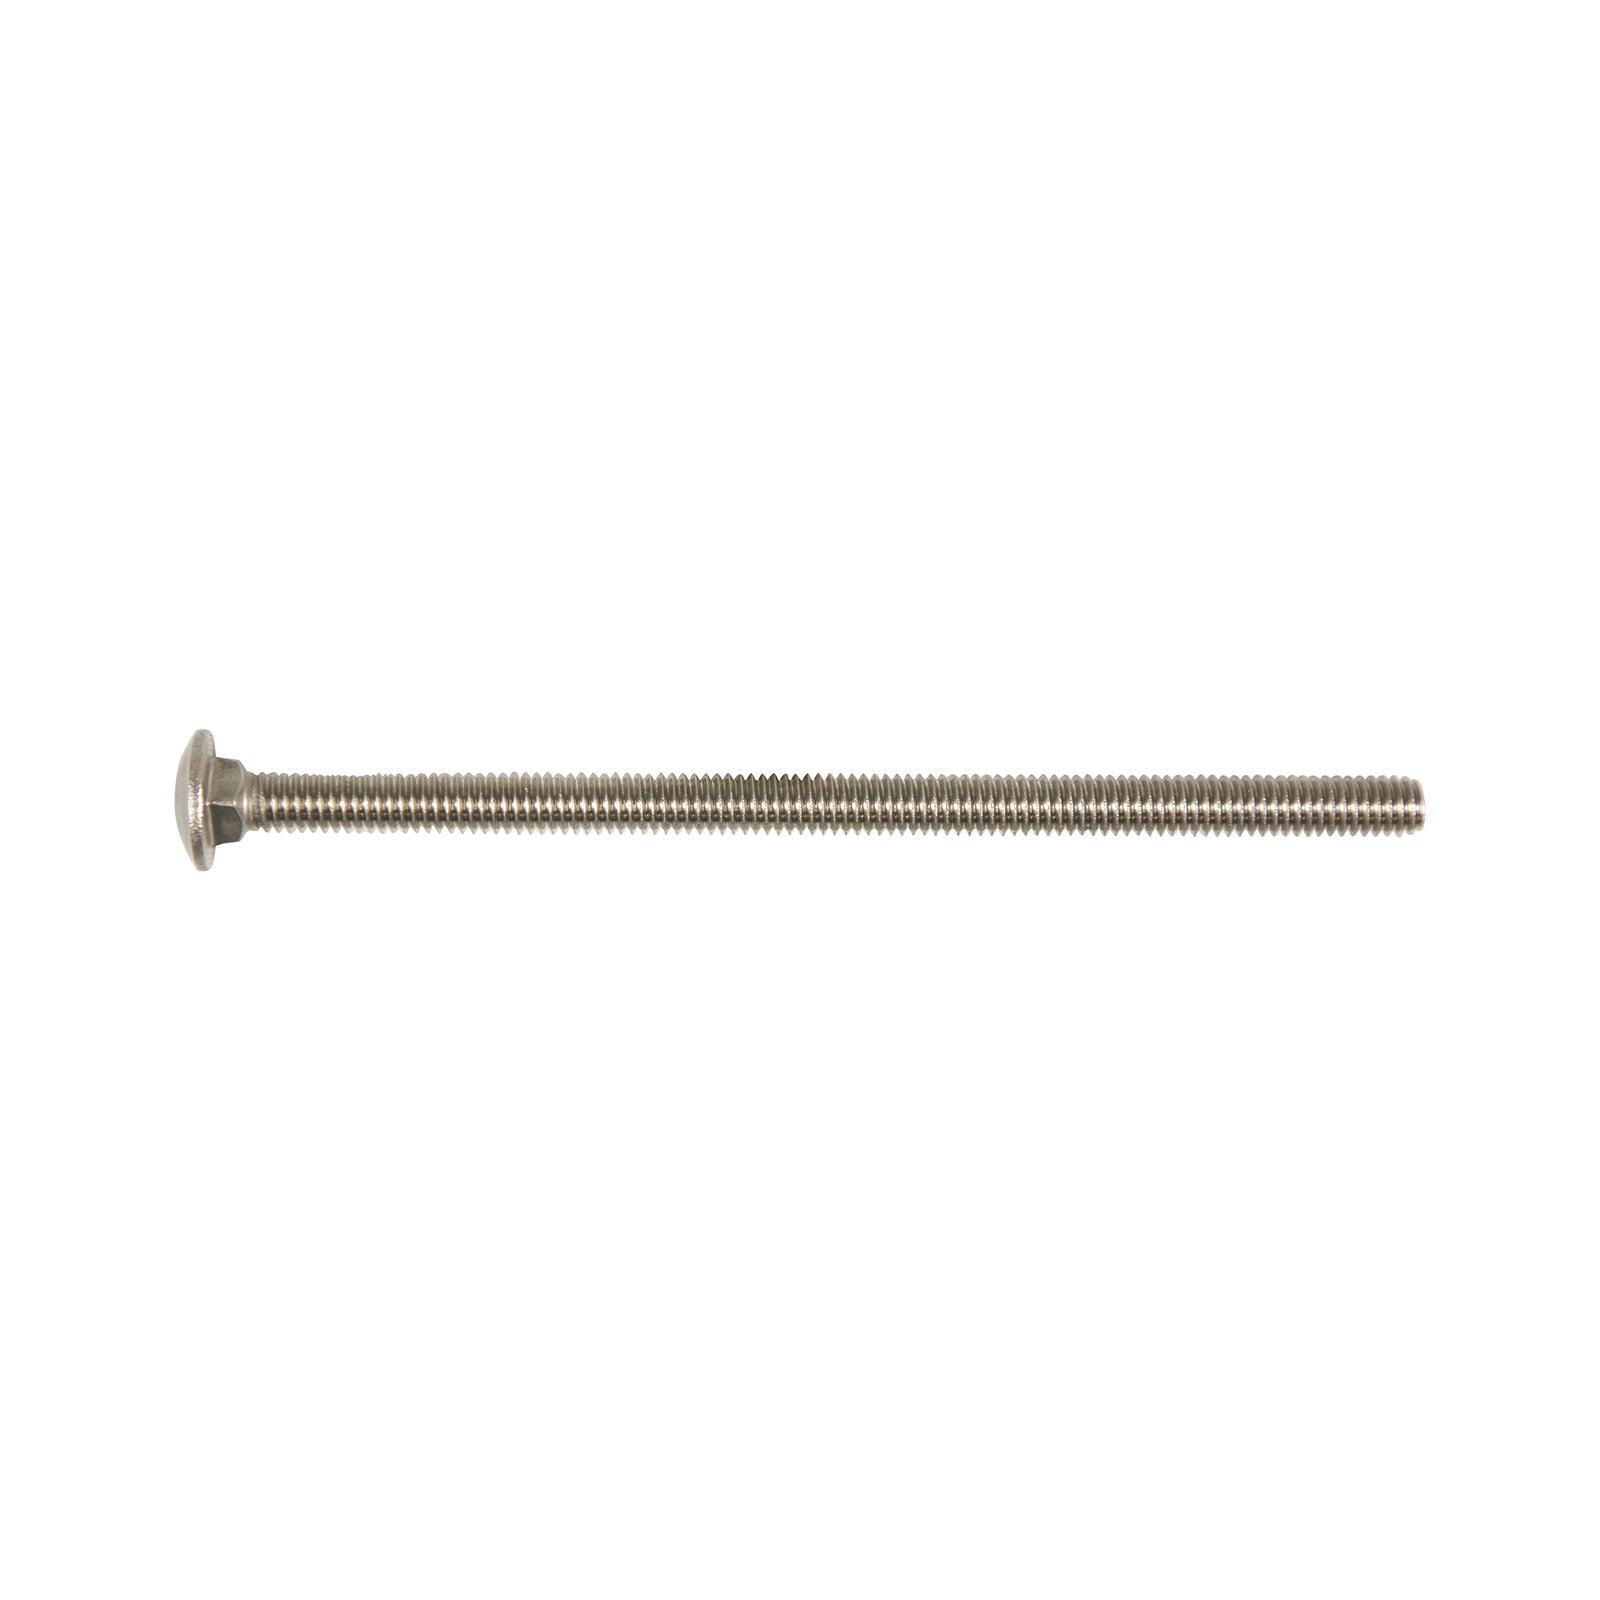 5/16"-18 x 6" Conquest Carriage Bolt - 304 Stainless Steel